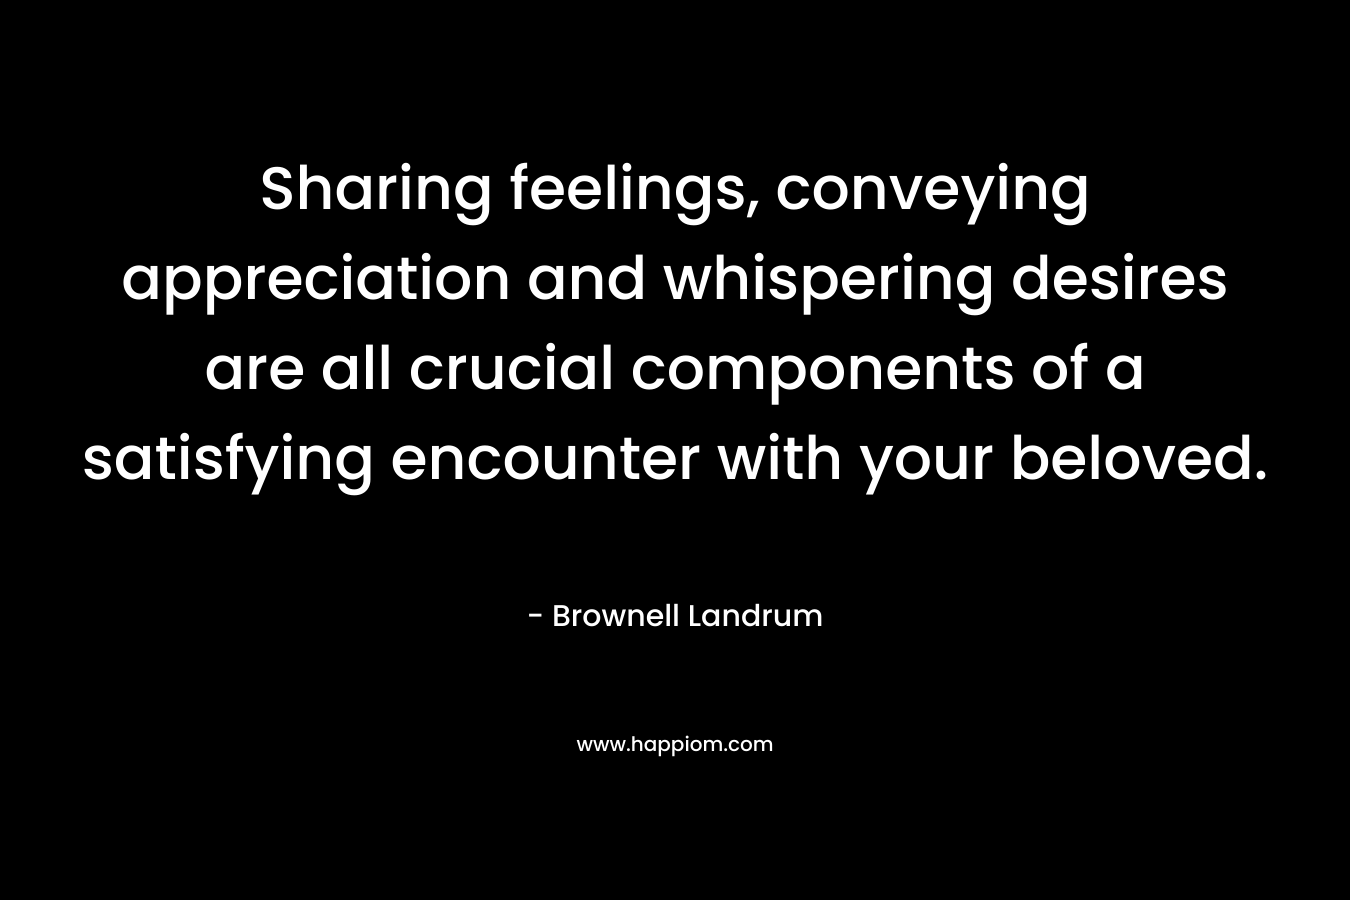 Sharing feelings, conveying appreciation and whispering desires are all crucial components of a satisfying encounter with your beloved.